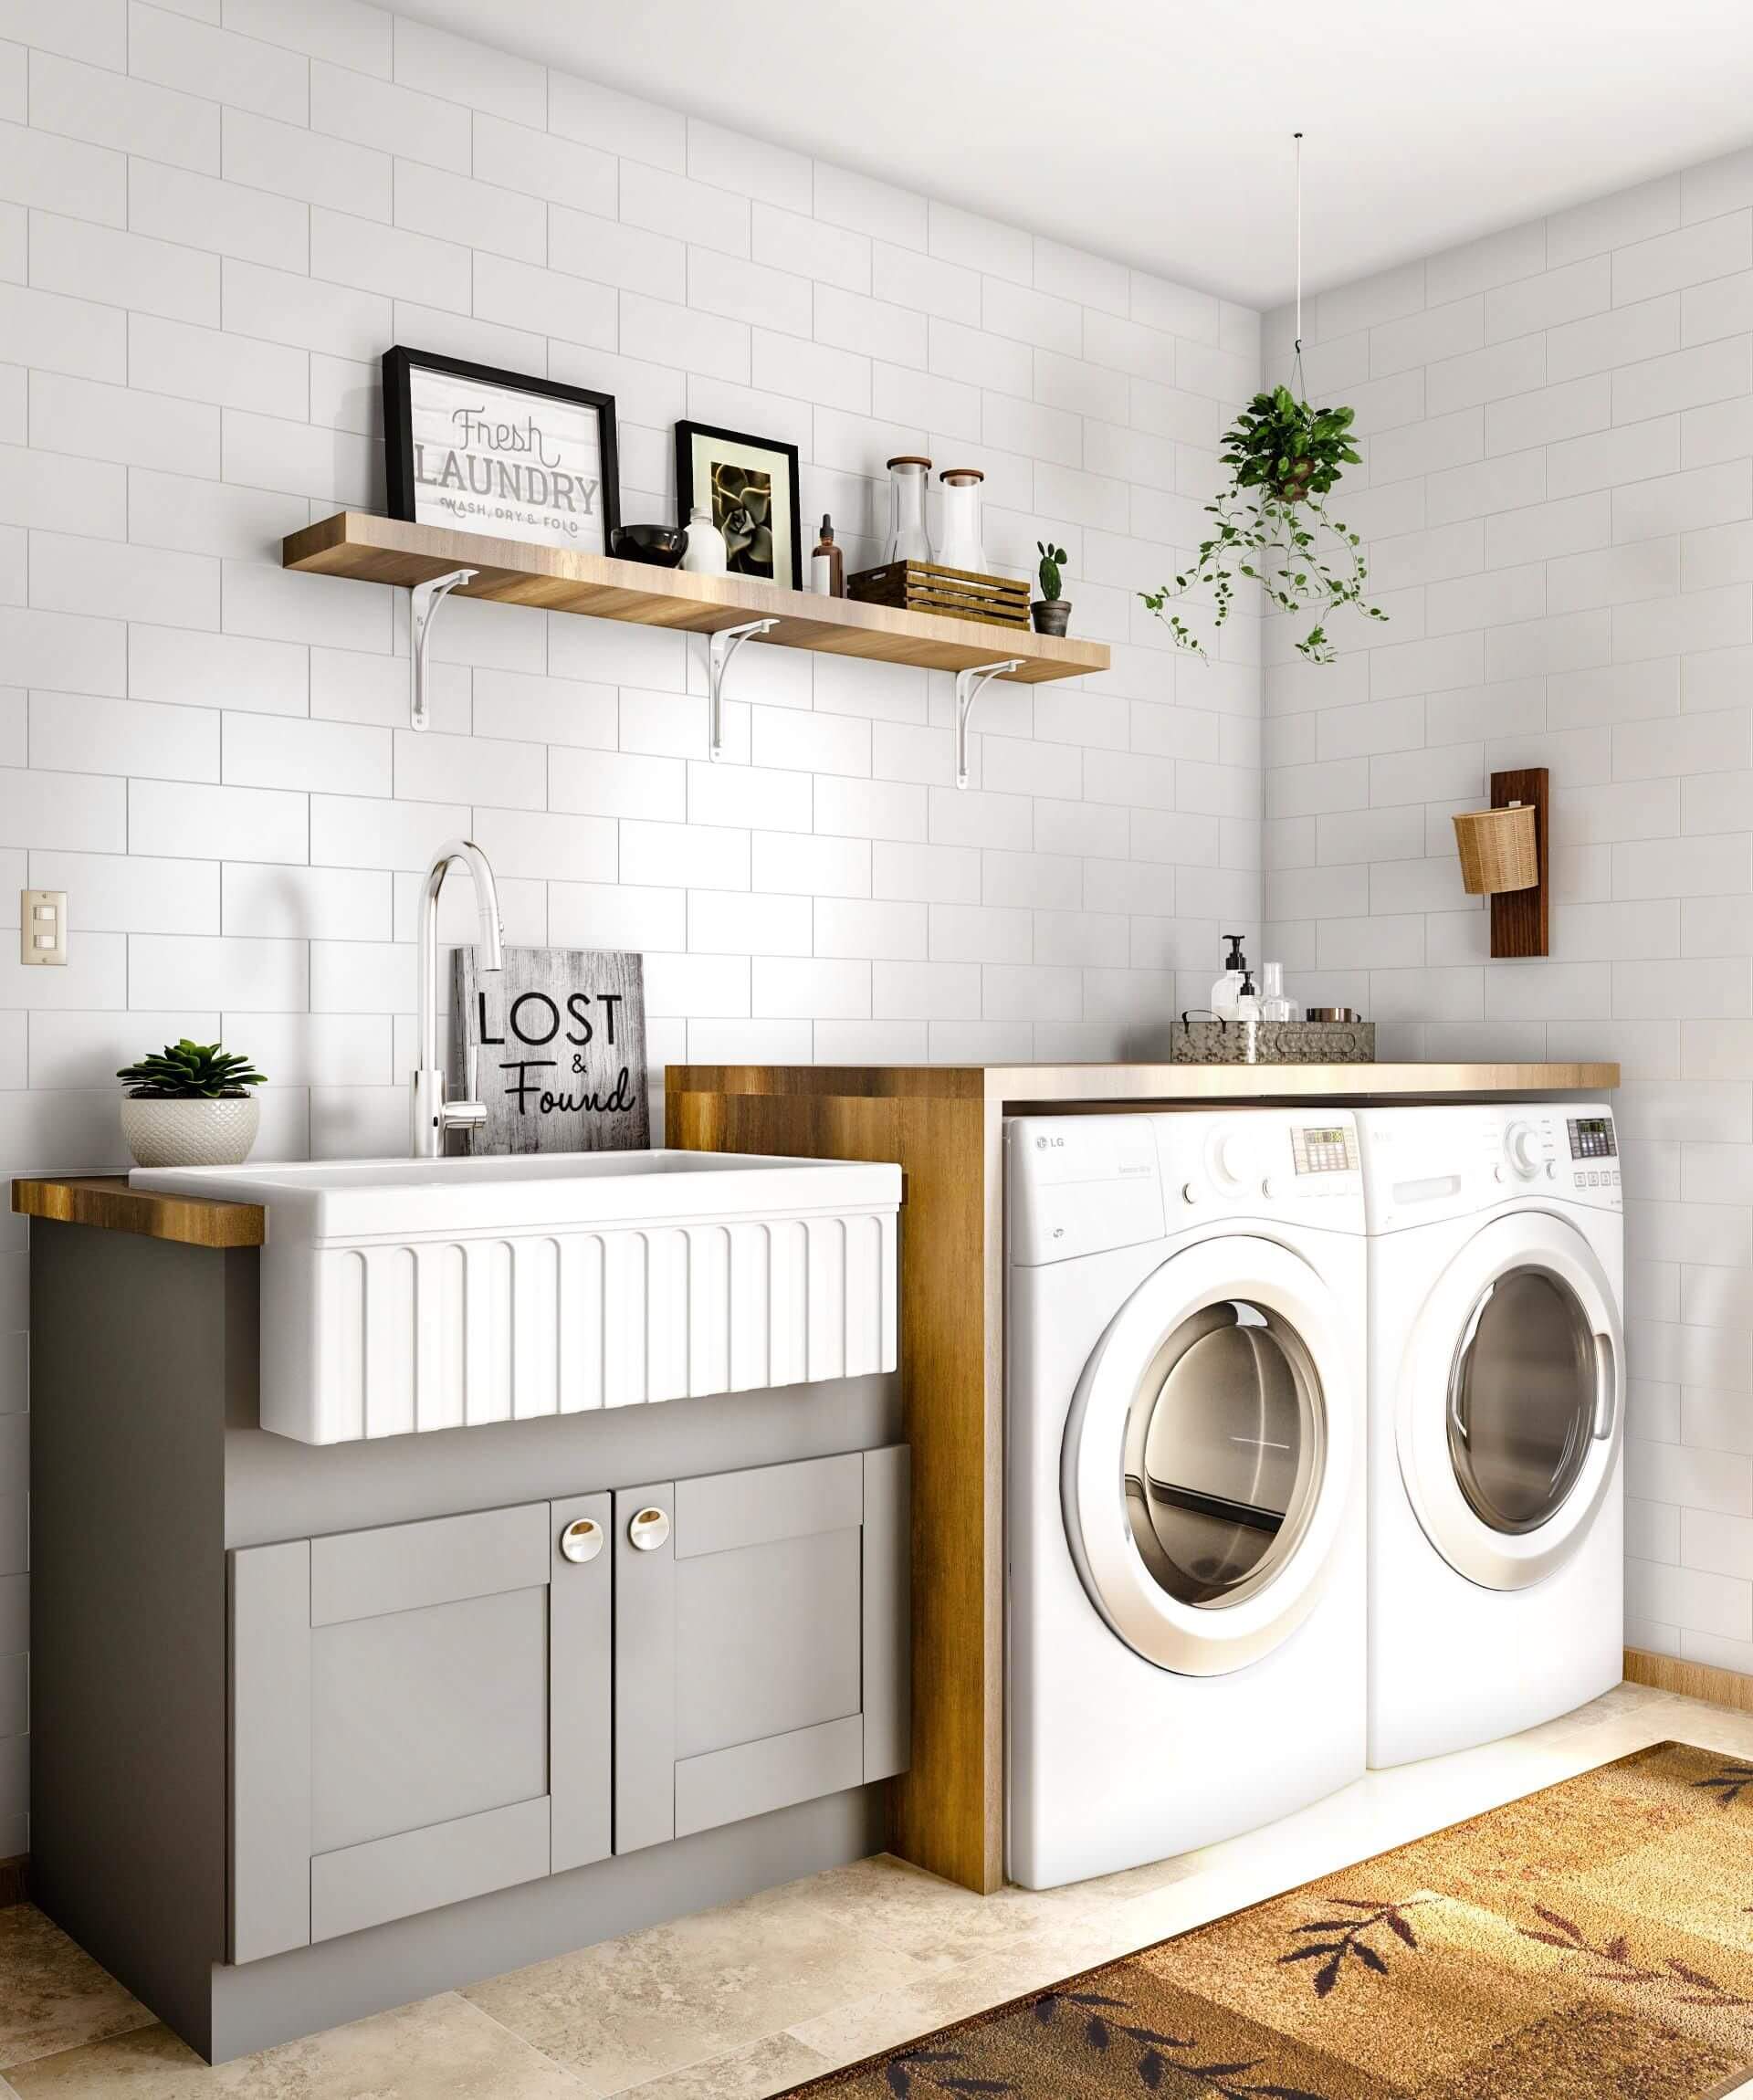 Modern Laundry Room Ideas for Small Spaces [ Updated 2020 ]